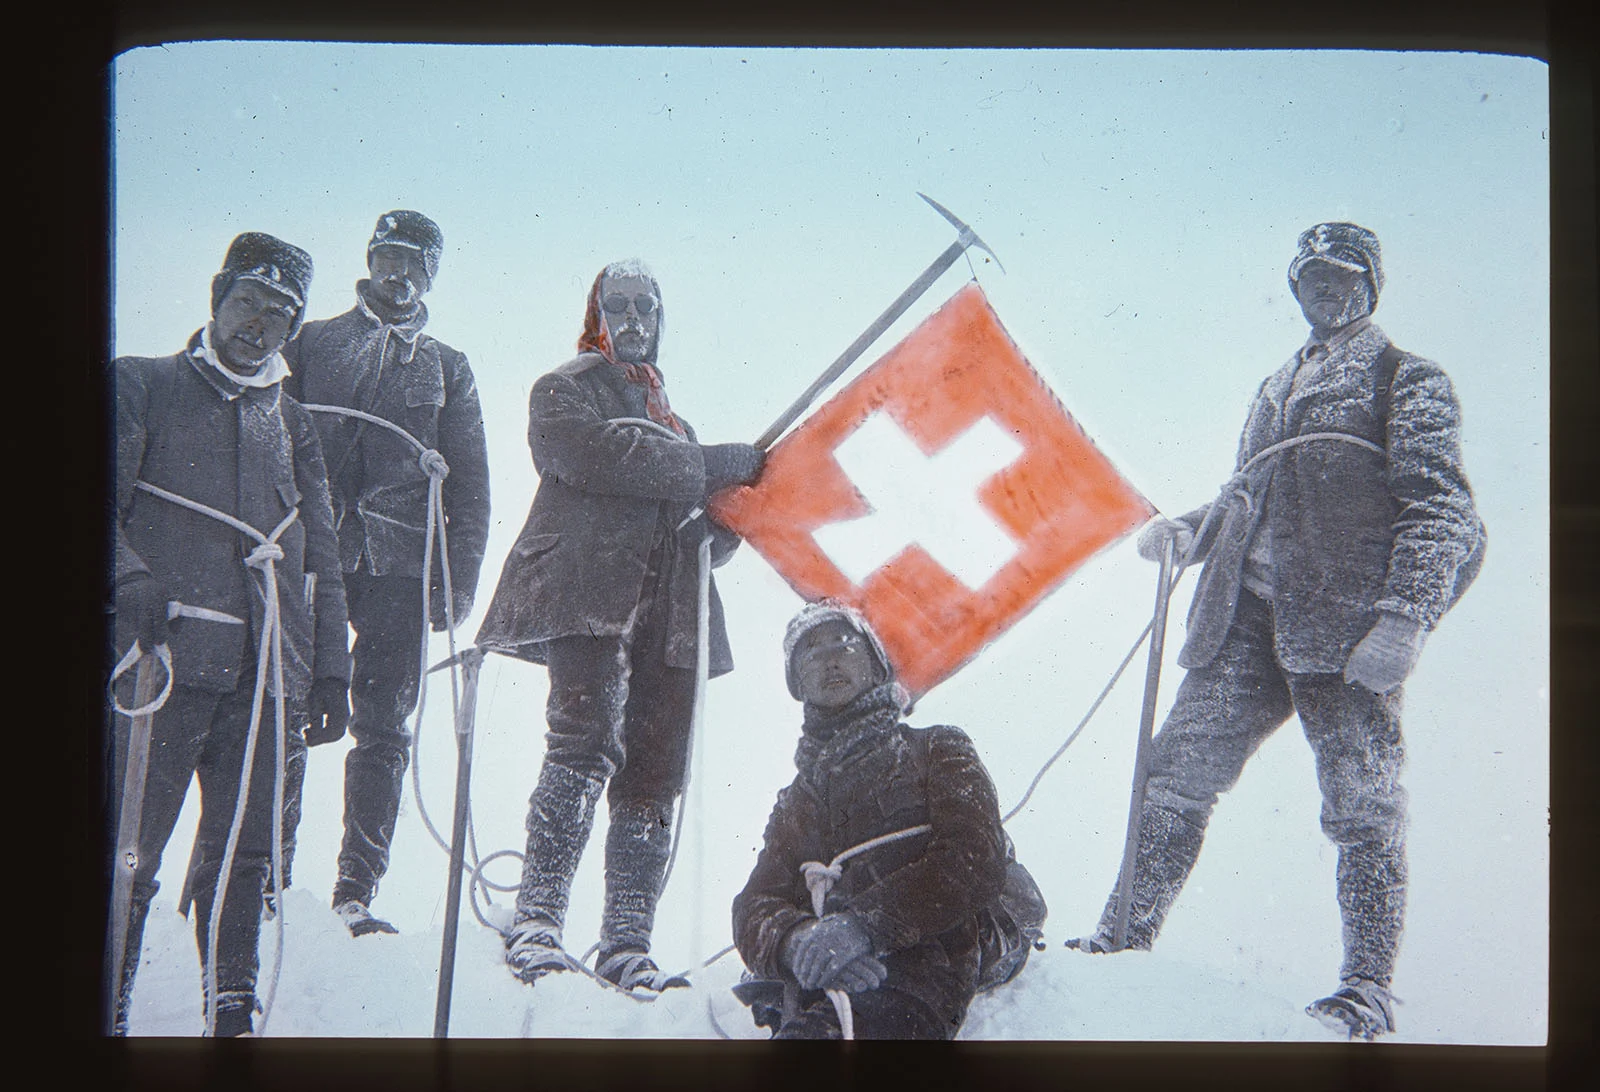 Expedition with swiss flag